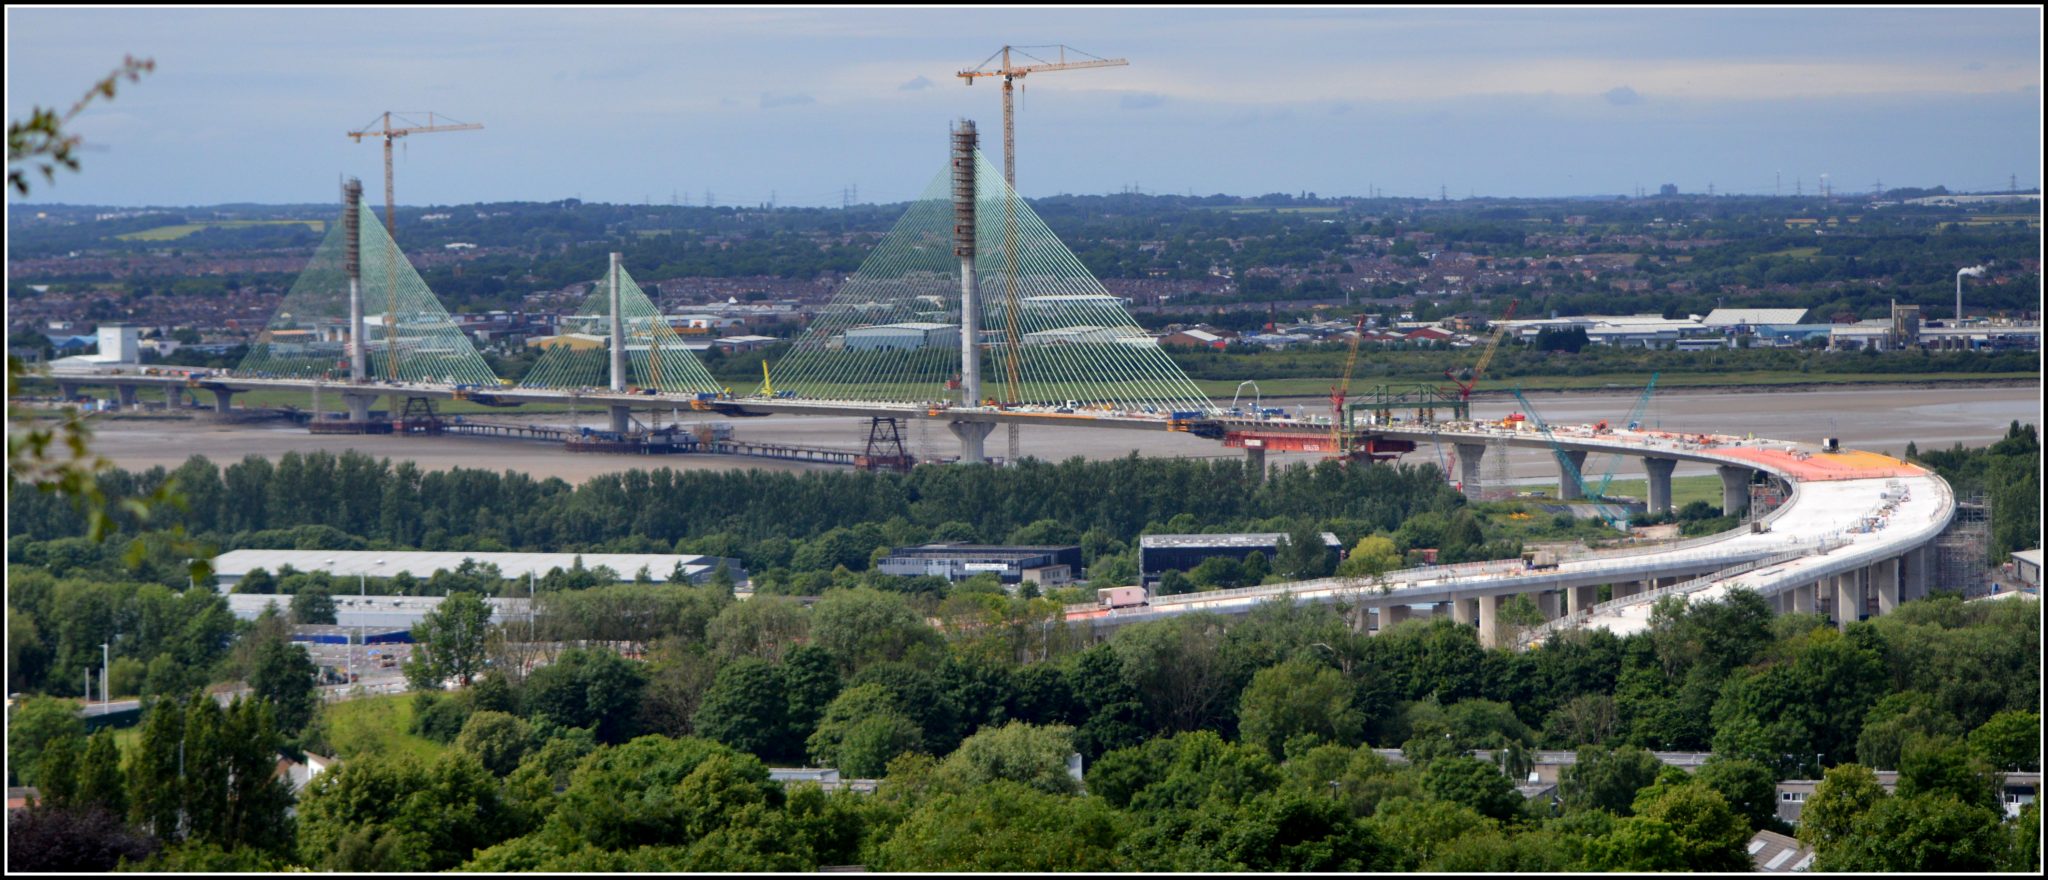 Special Form travellers for Mersey Gateway Bridge